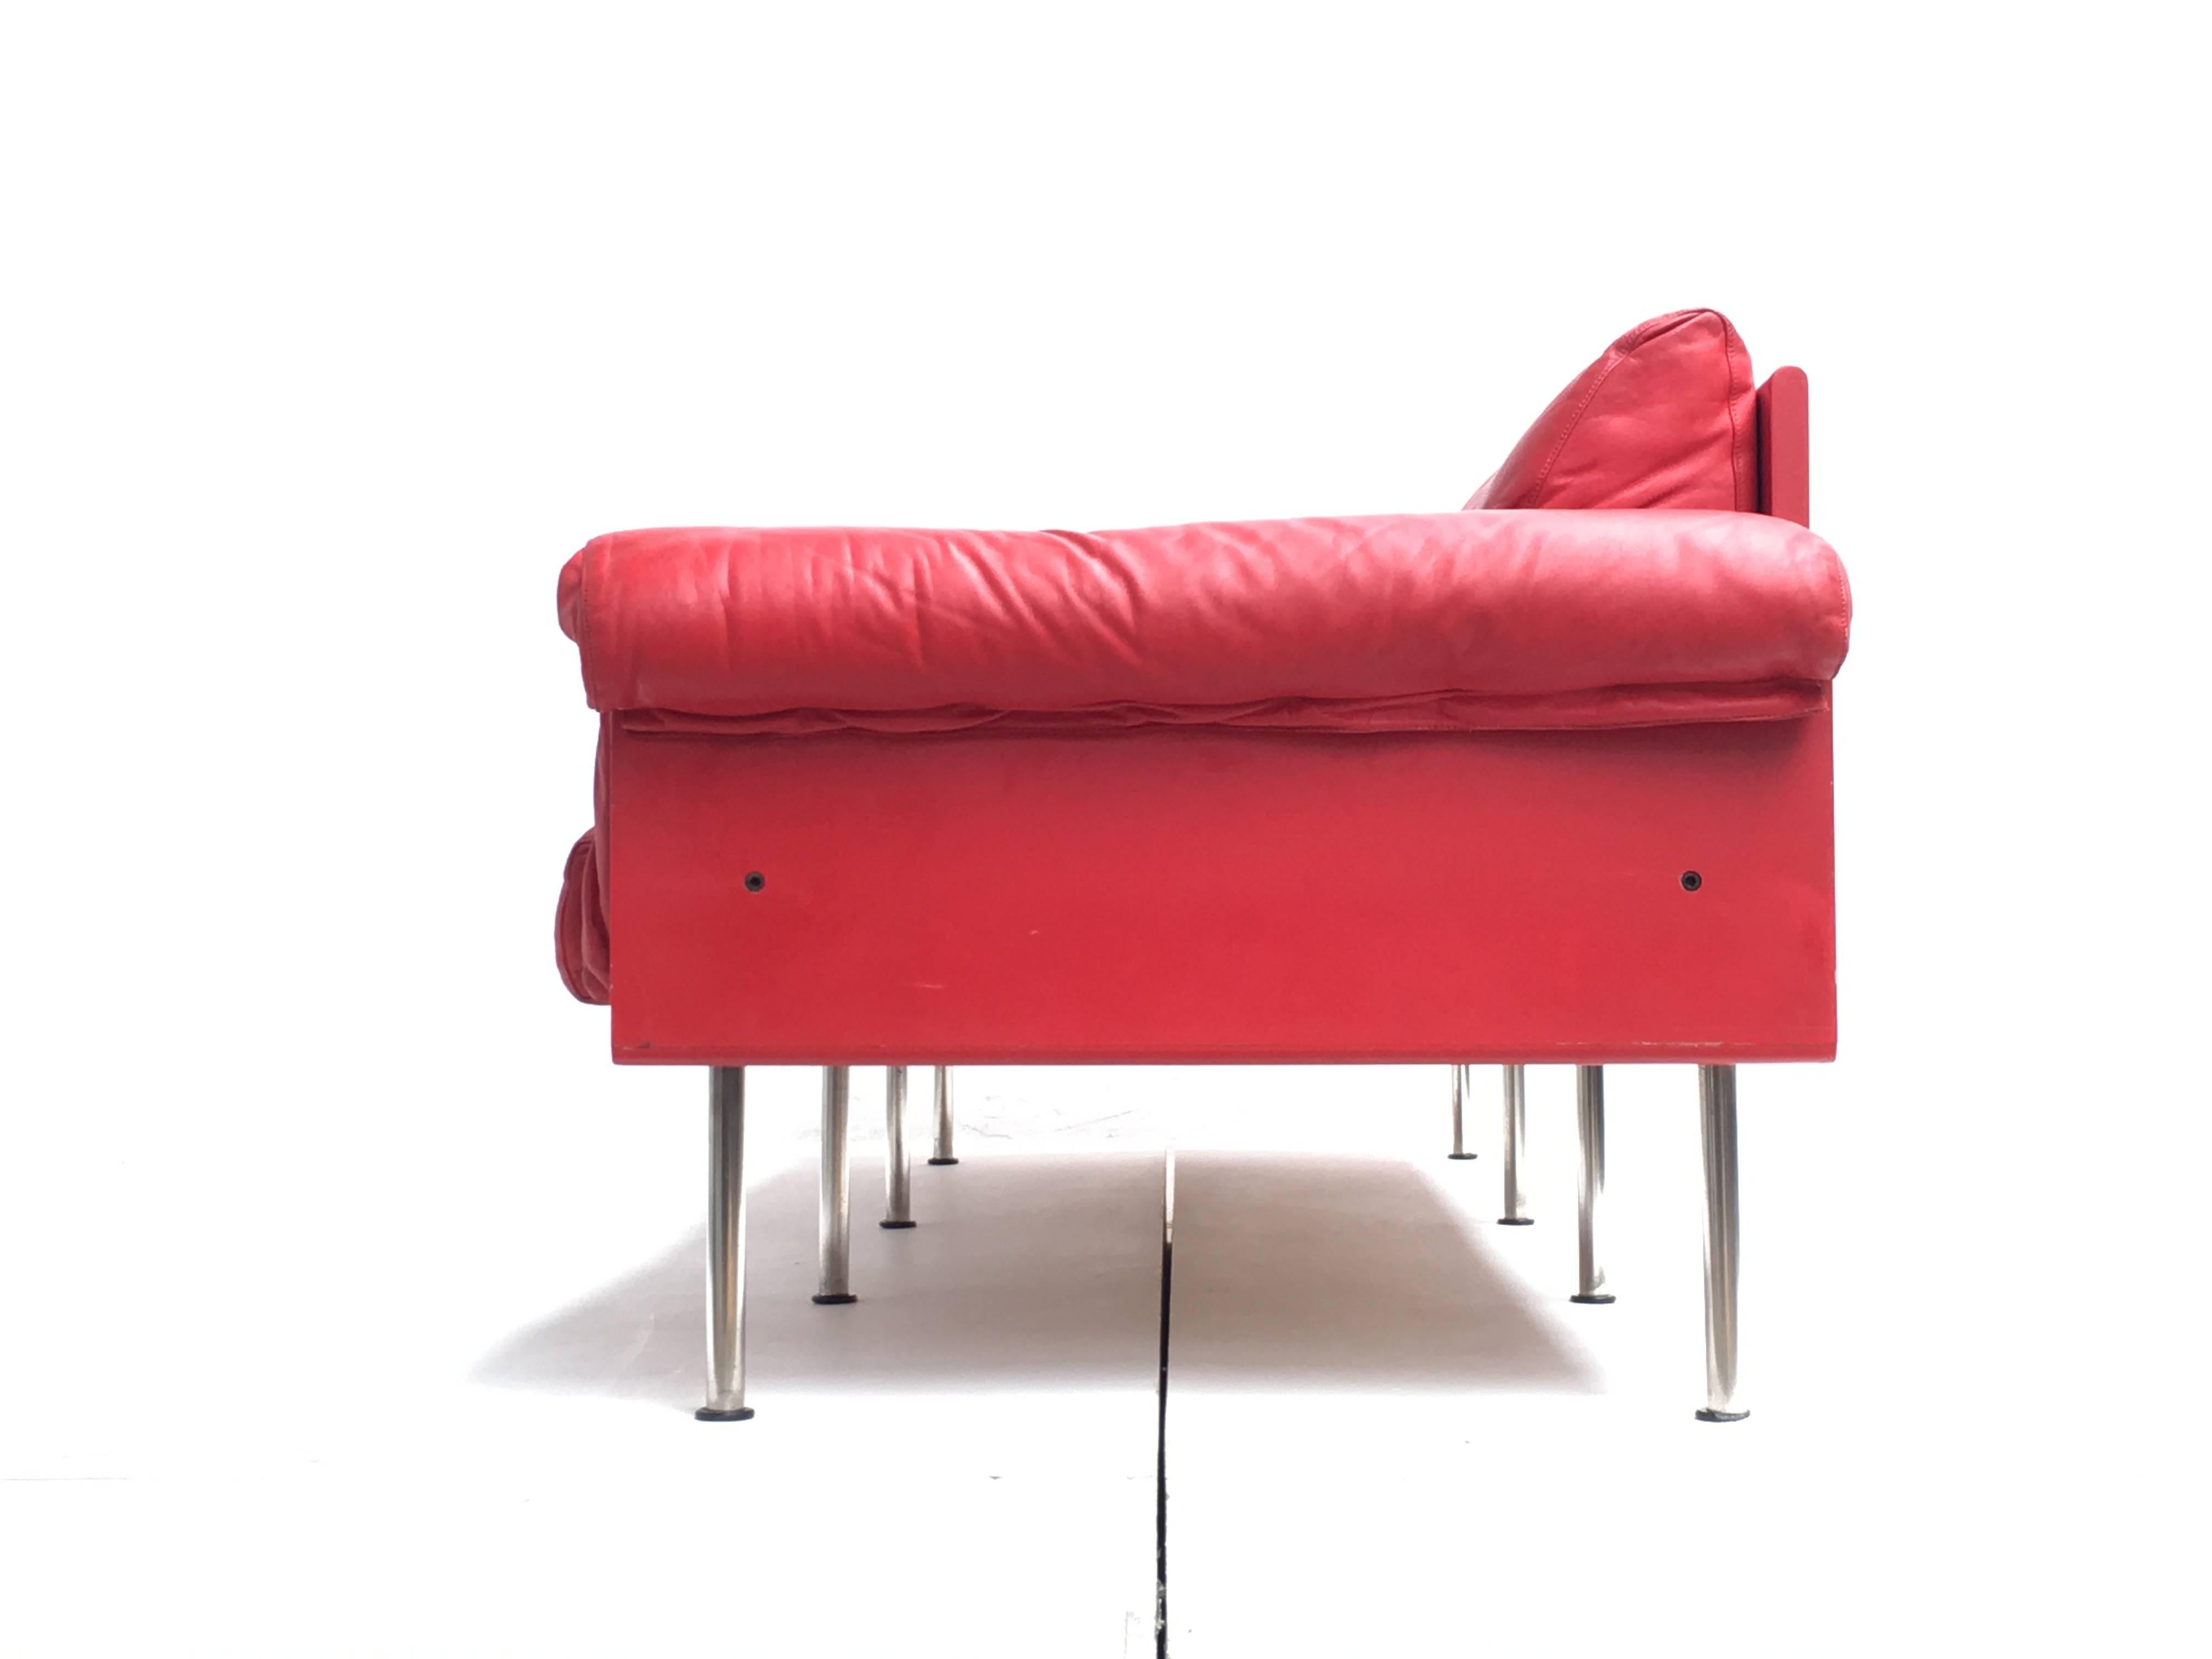 This 'Ateljee' sofa/daybed was designed by Yrjö Kukkapuro in 1963 for Haimi Oy in Helsinki

This design classic is one of the iconic pieces from Yrjo Kukkapuro and is an original vintage piece produced in the 1960s or 1970s

The Ateljee sofa has